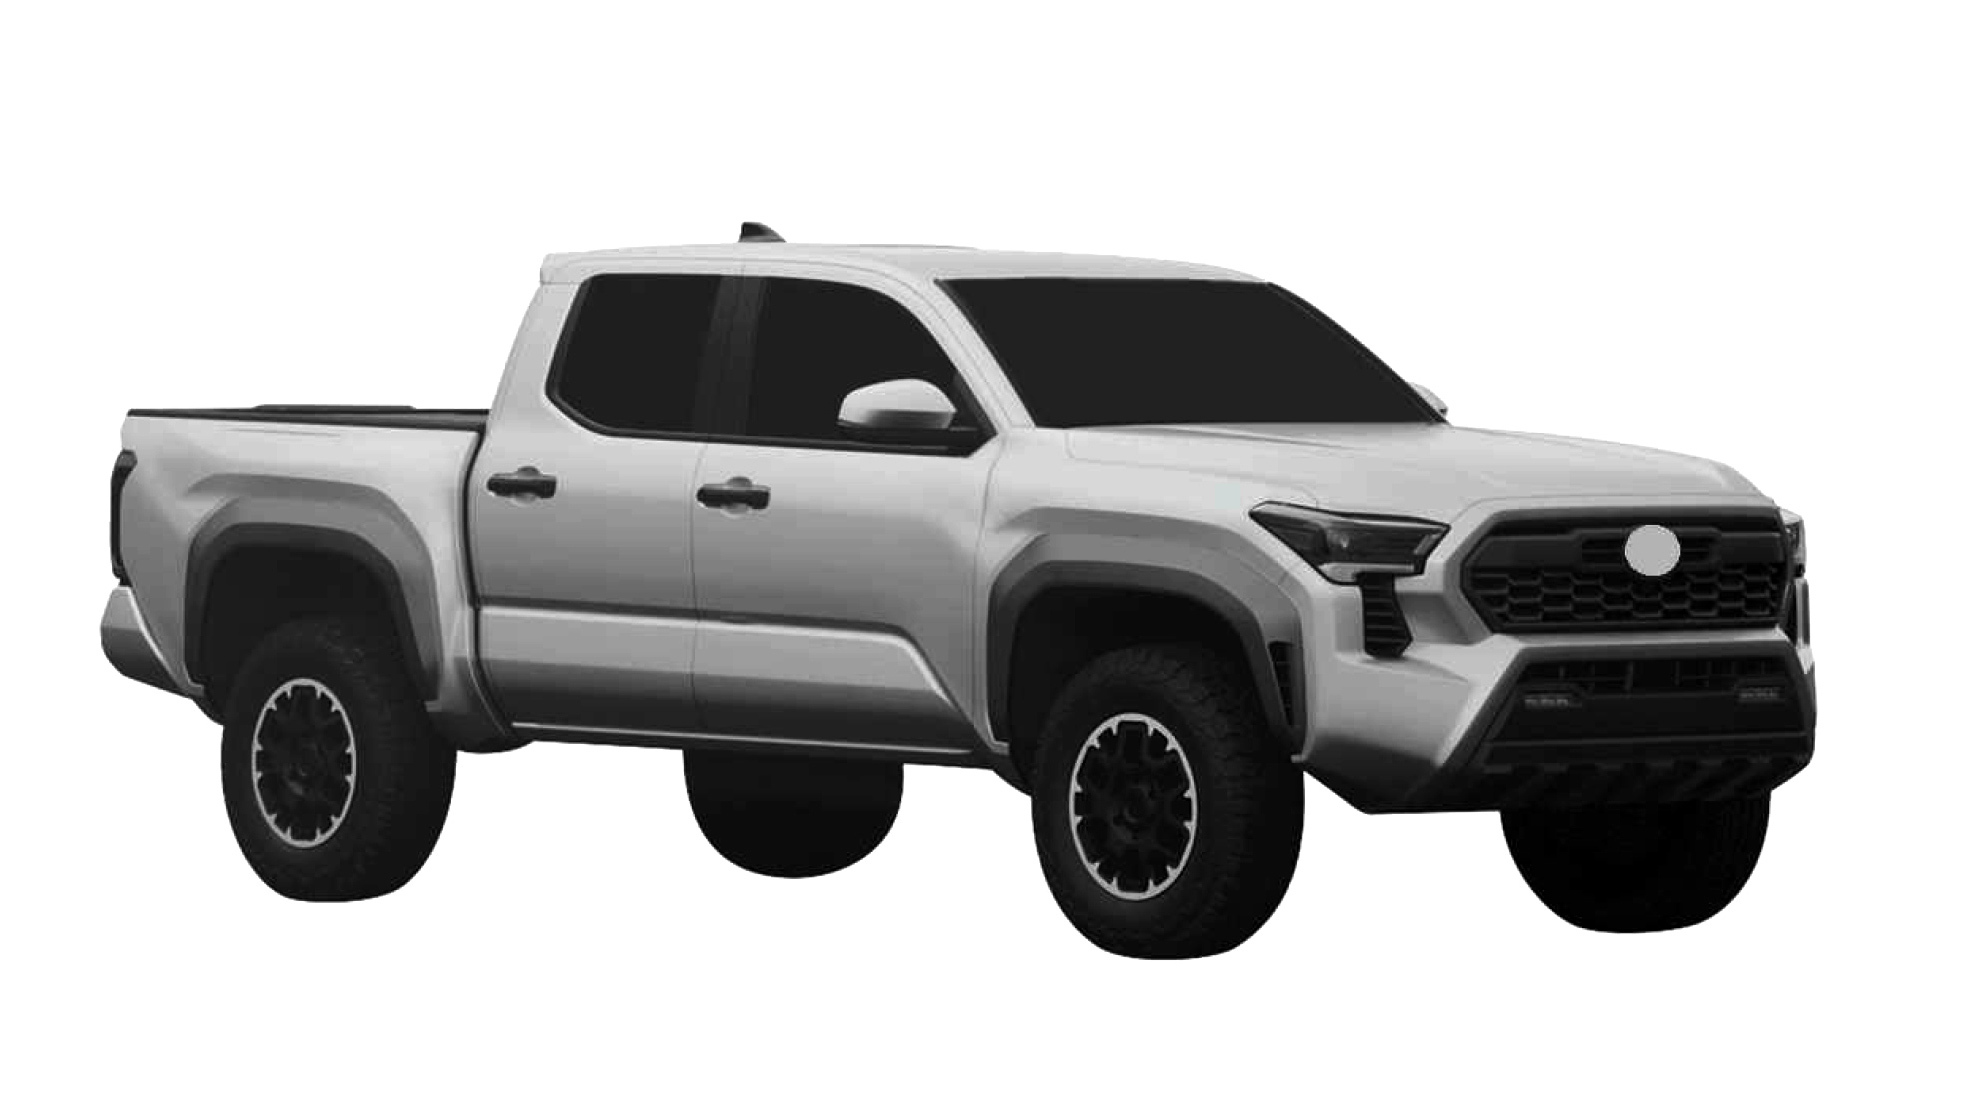 Here's the new 2025 Toyota HiLux with a tougher Tacoma-inspired look